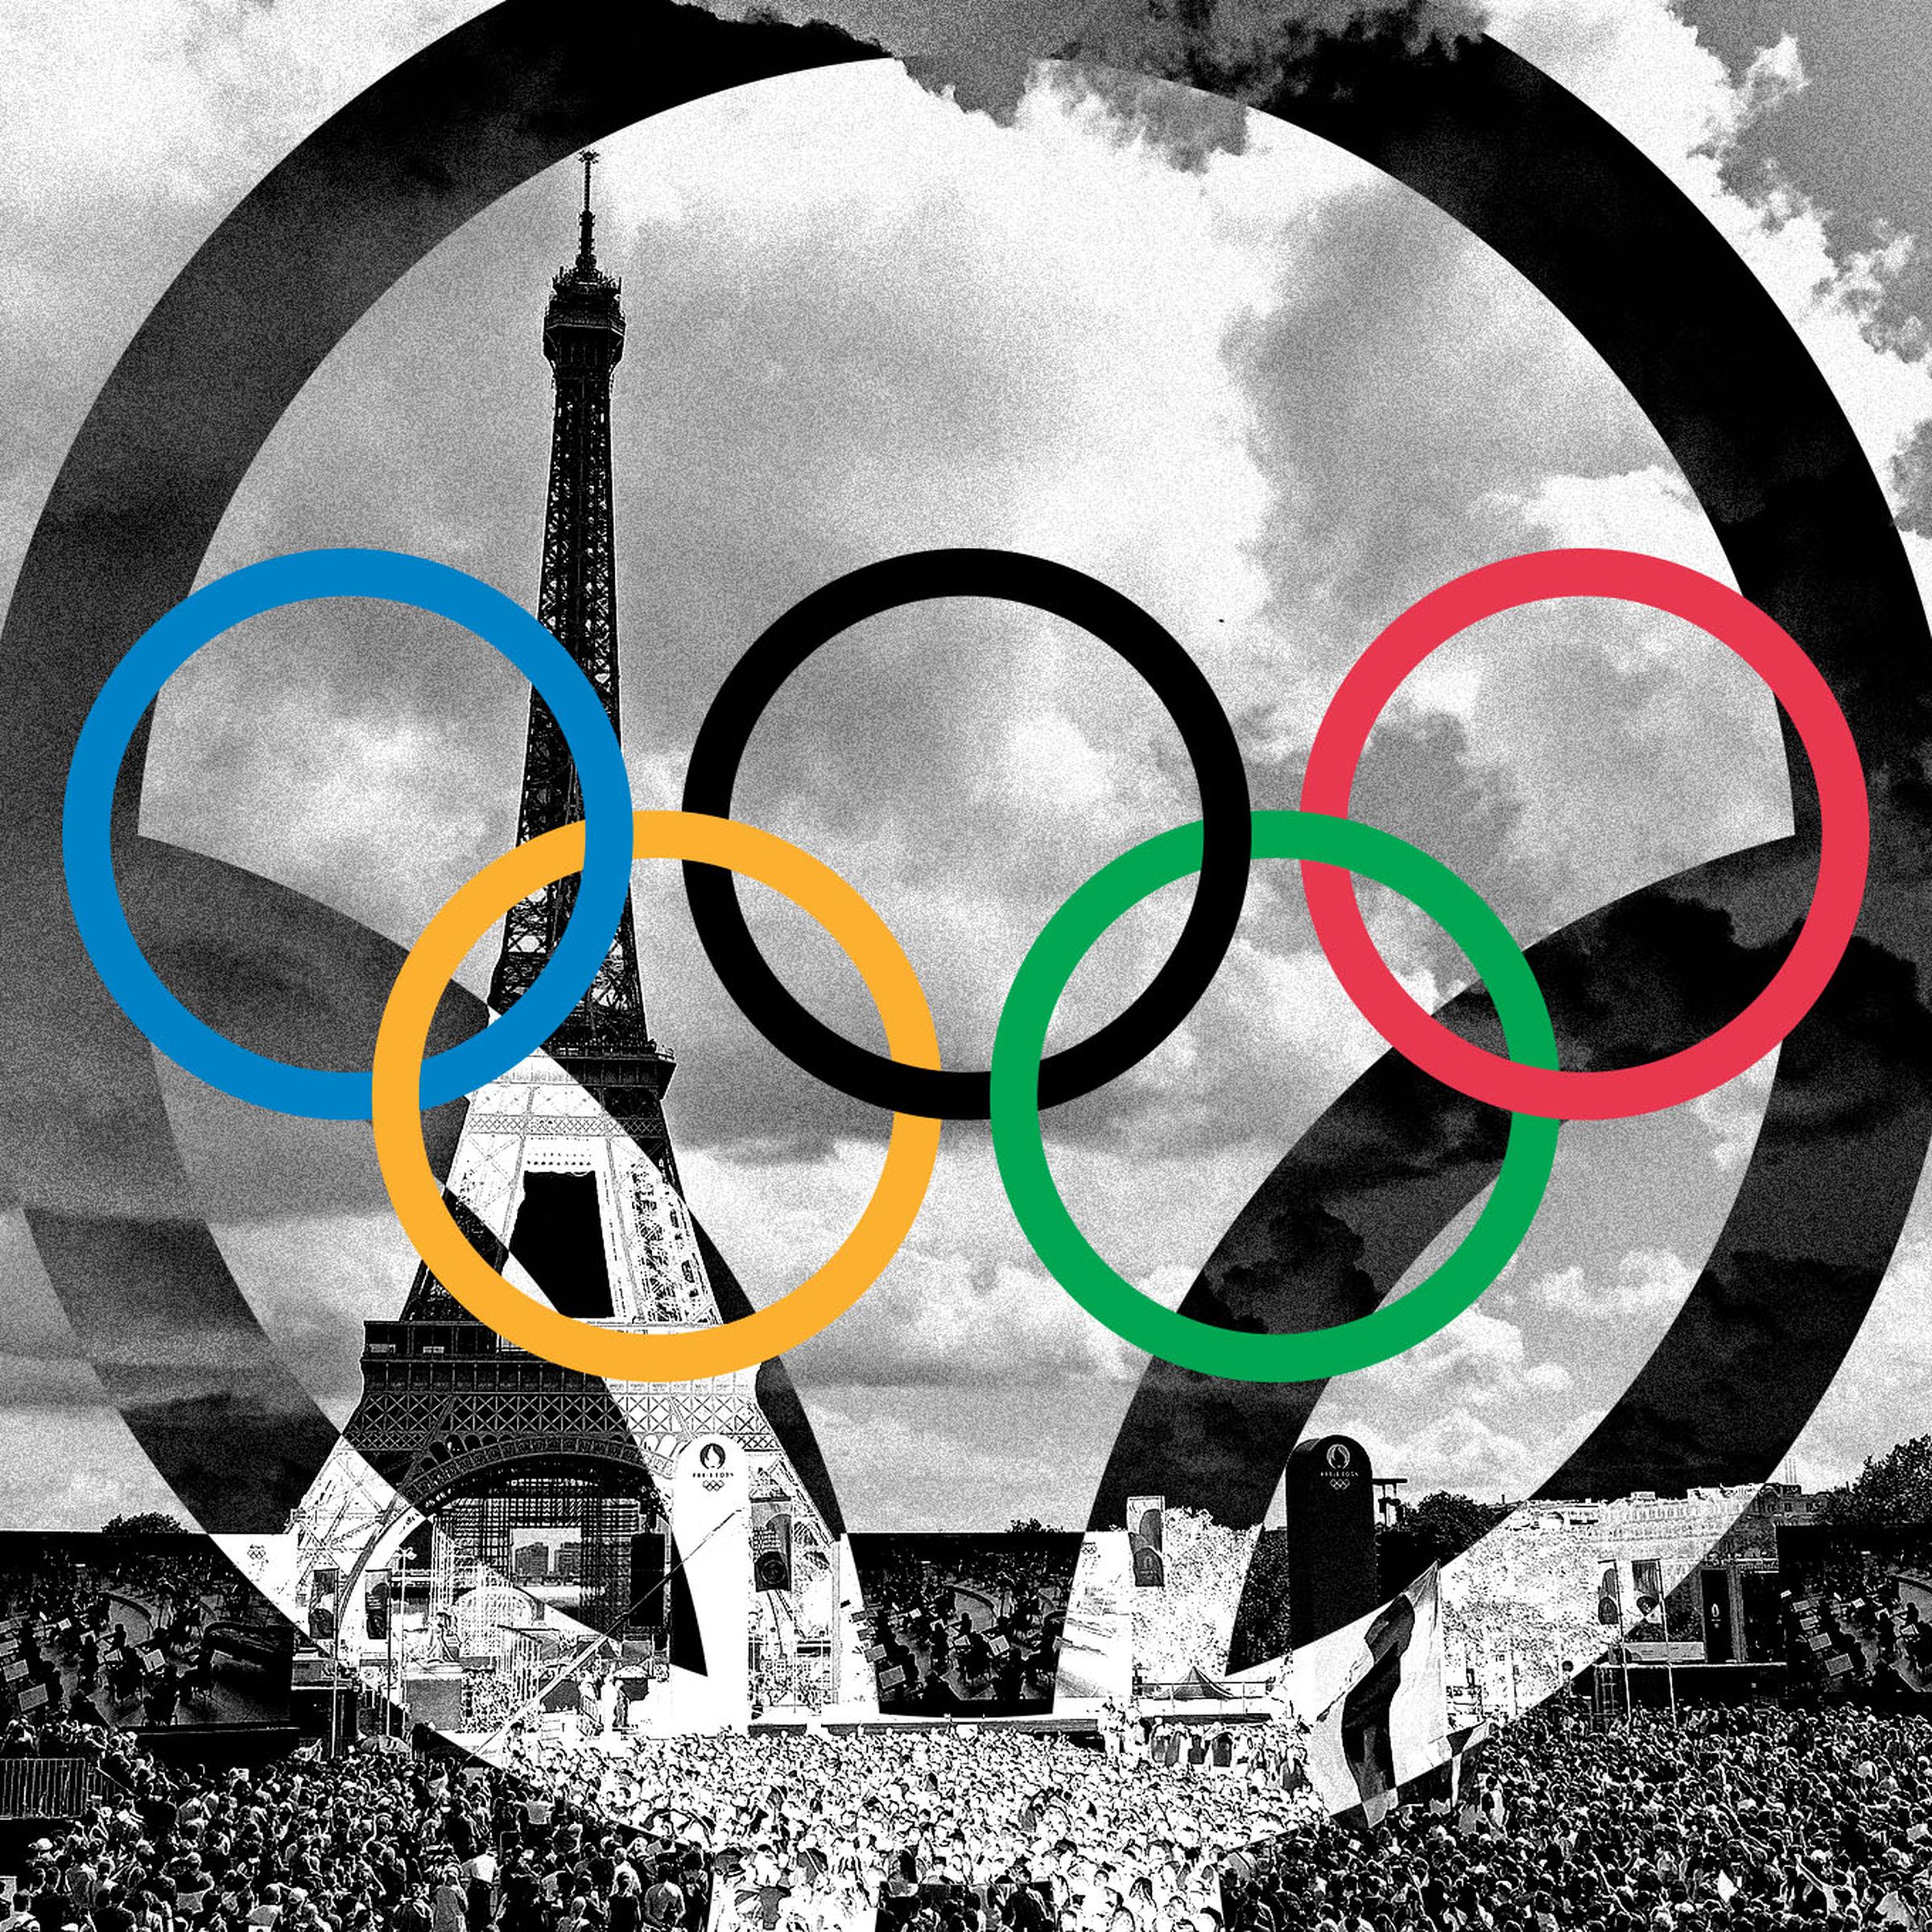 Photo collage of the Olympics rings over a photo of a Paris Olympics event.